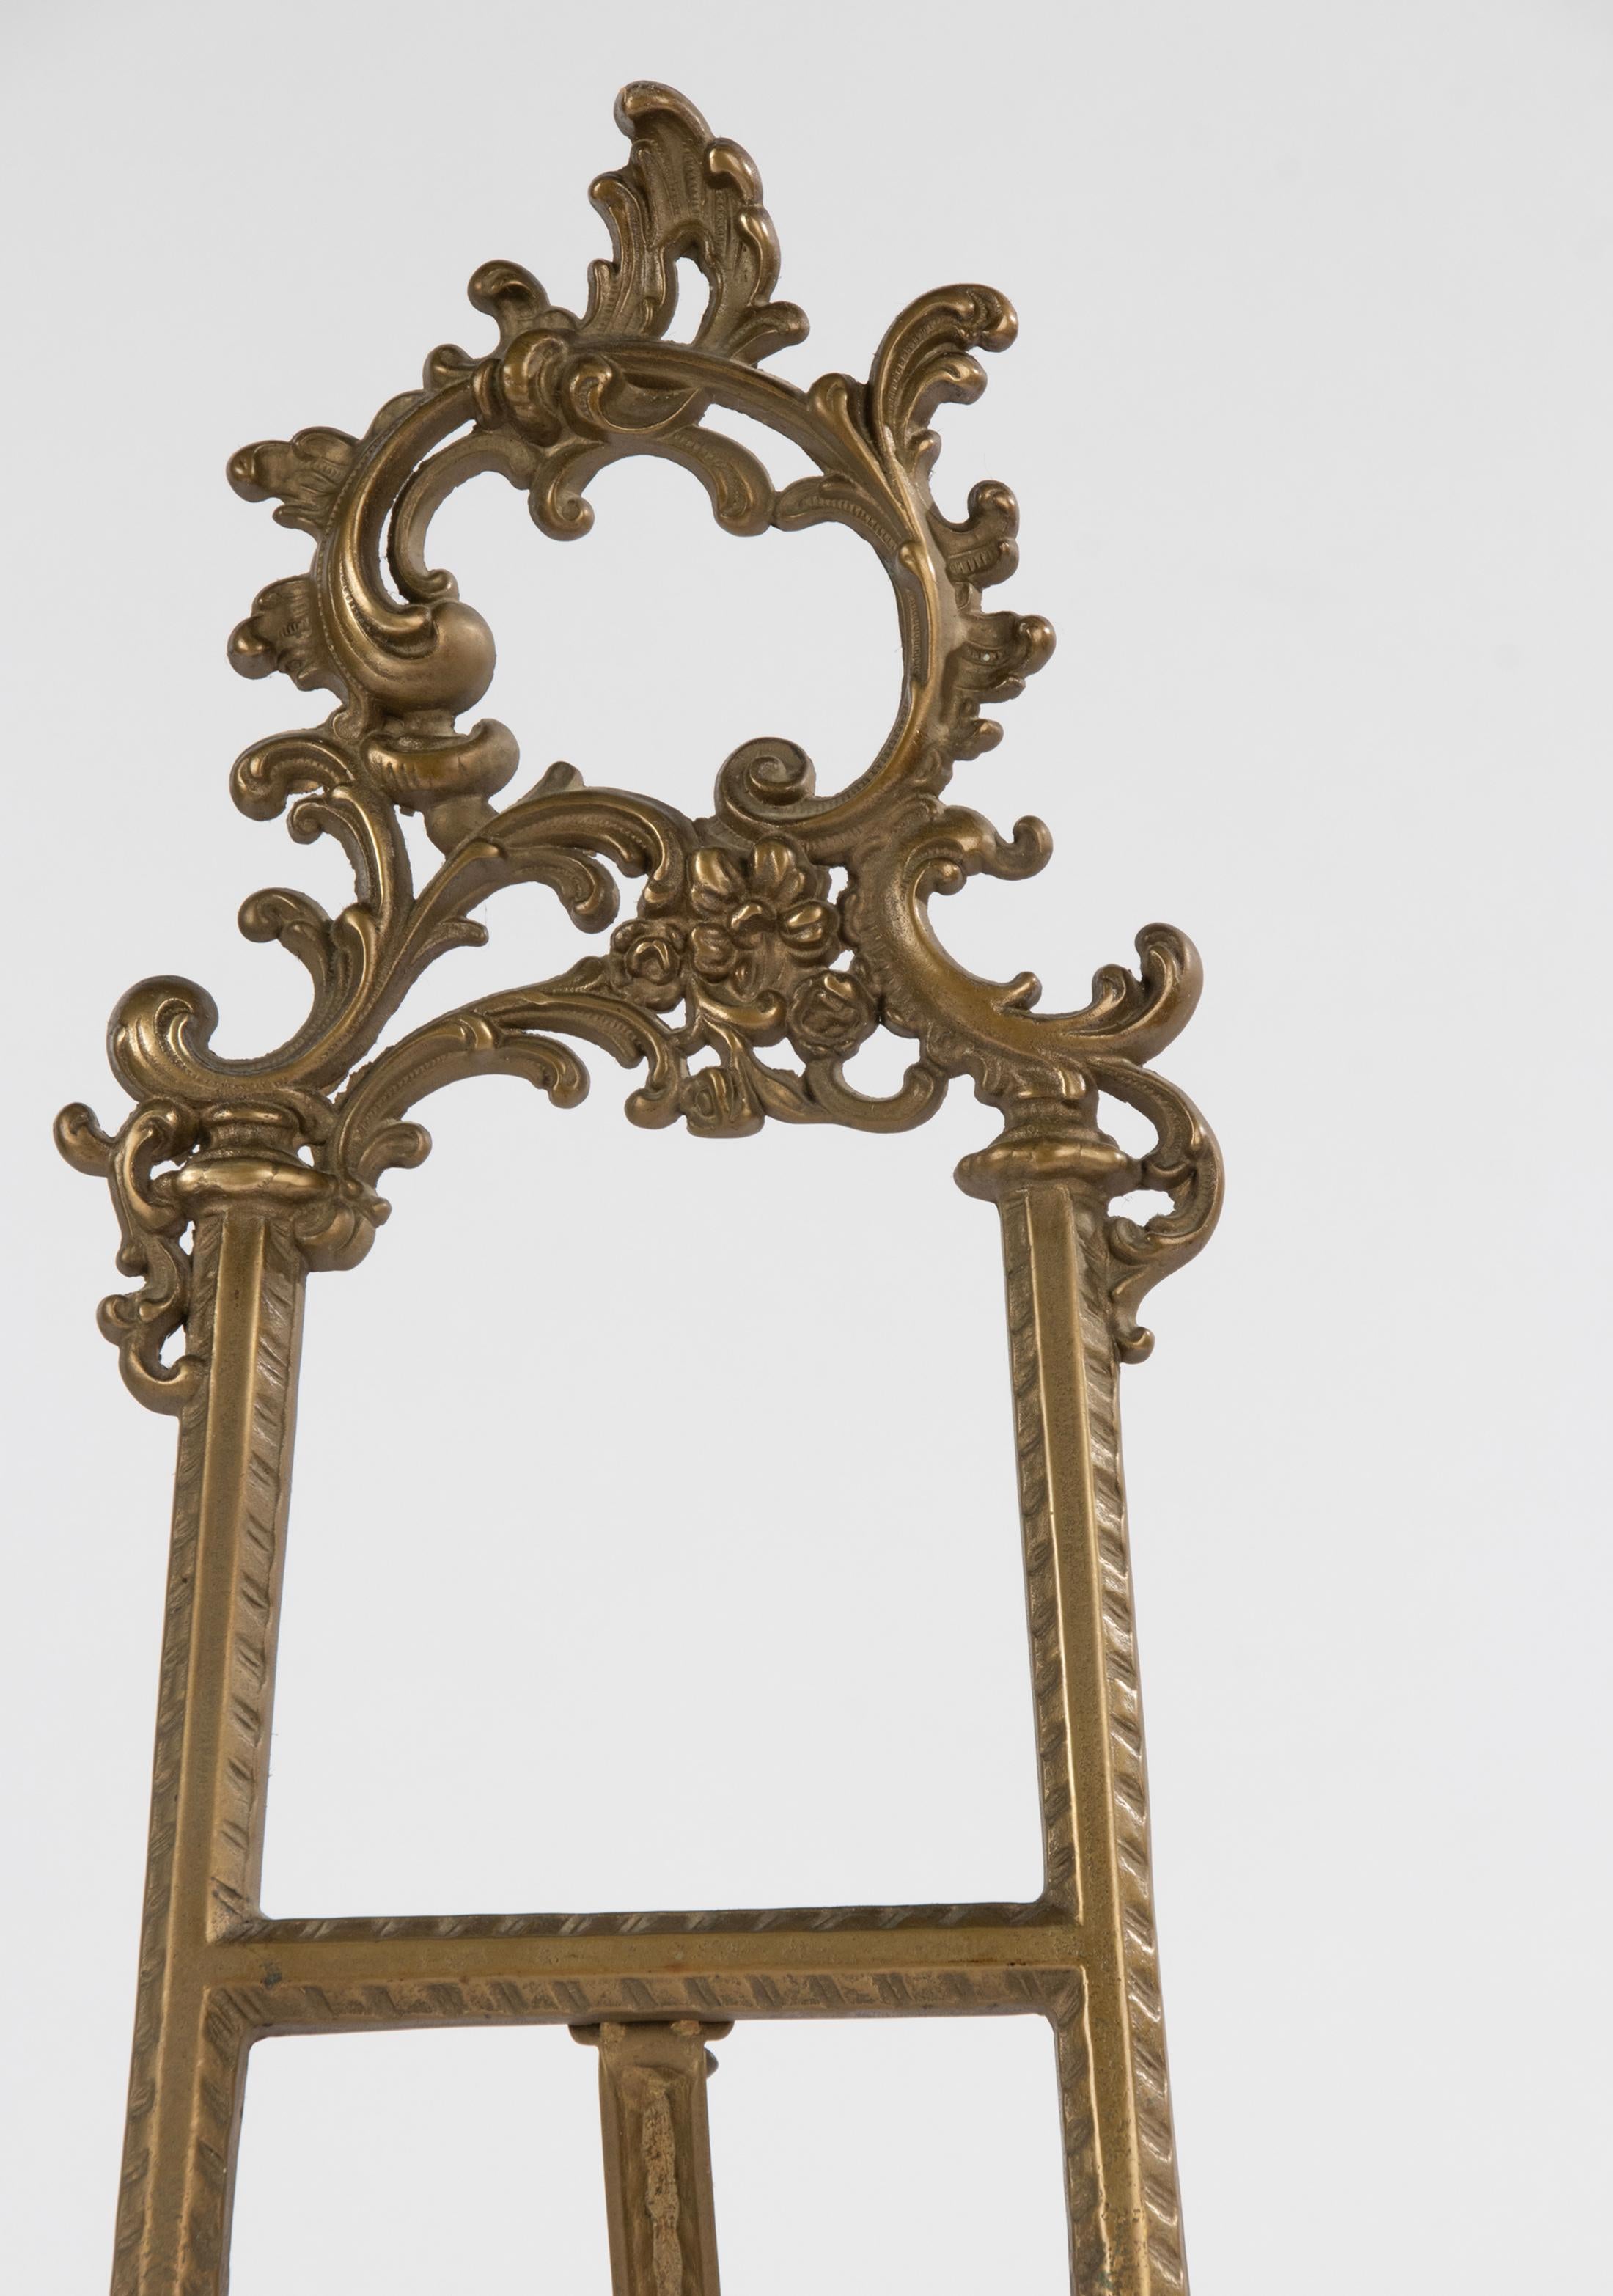 A beautiful early 20th century brass display stand, decorated in rococo style. 
The stand is made of brass. 
Beautiful colour and patina. 
A nice piece for displaying paintings, drawings or books. 
The stand is in very good condition. Sturdy and